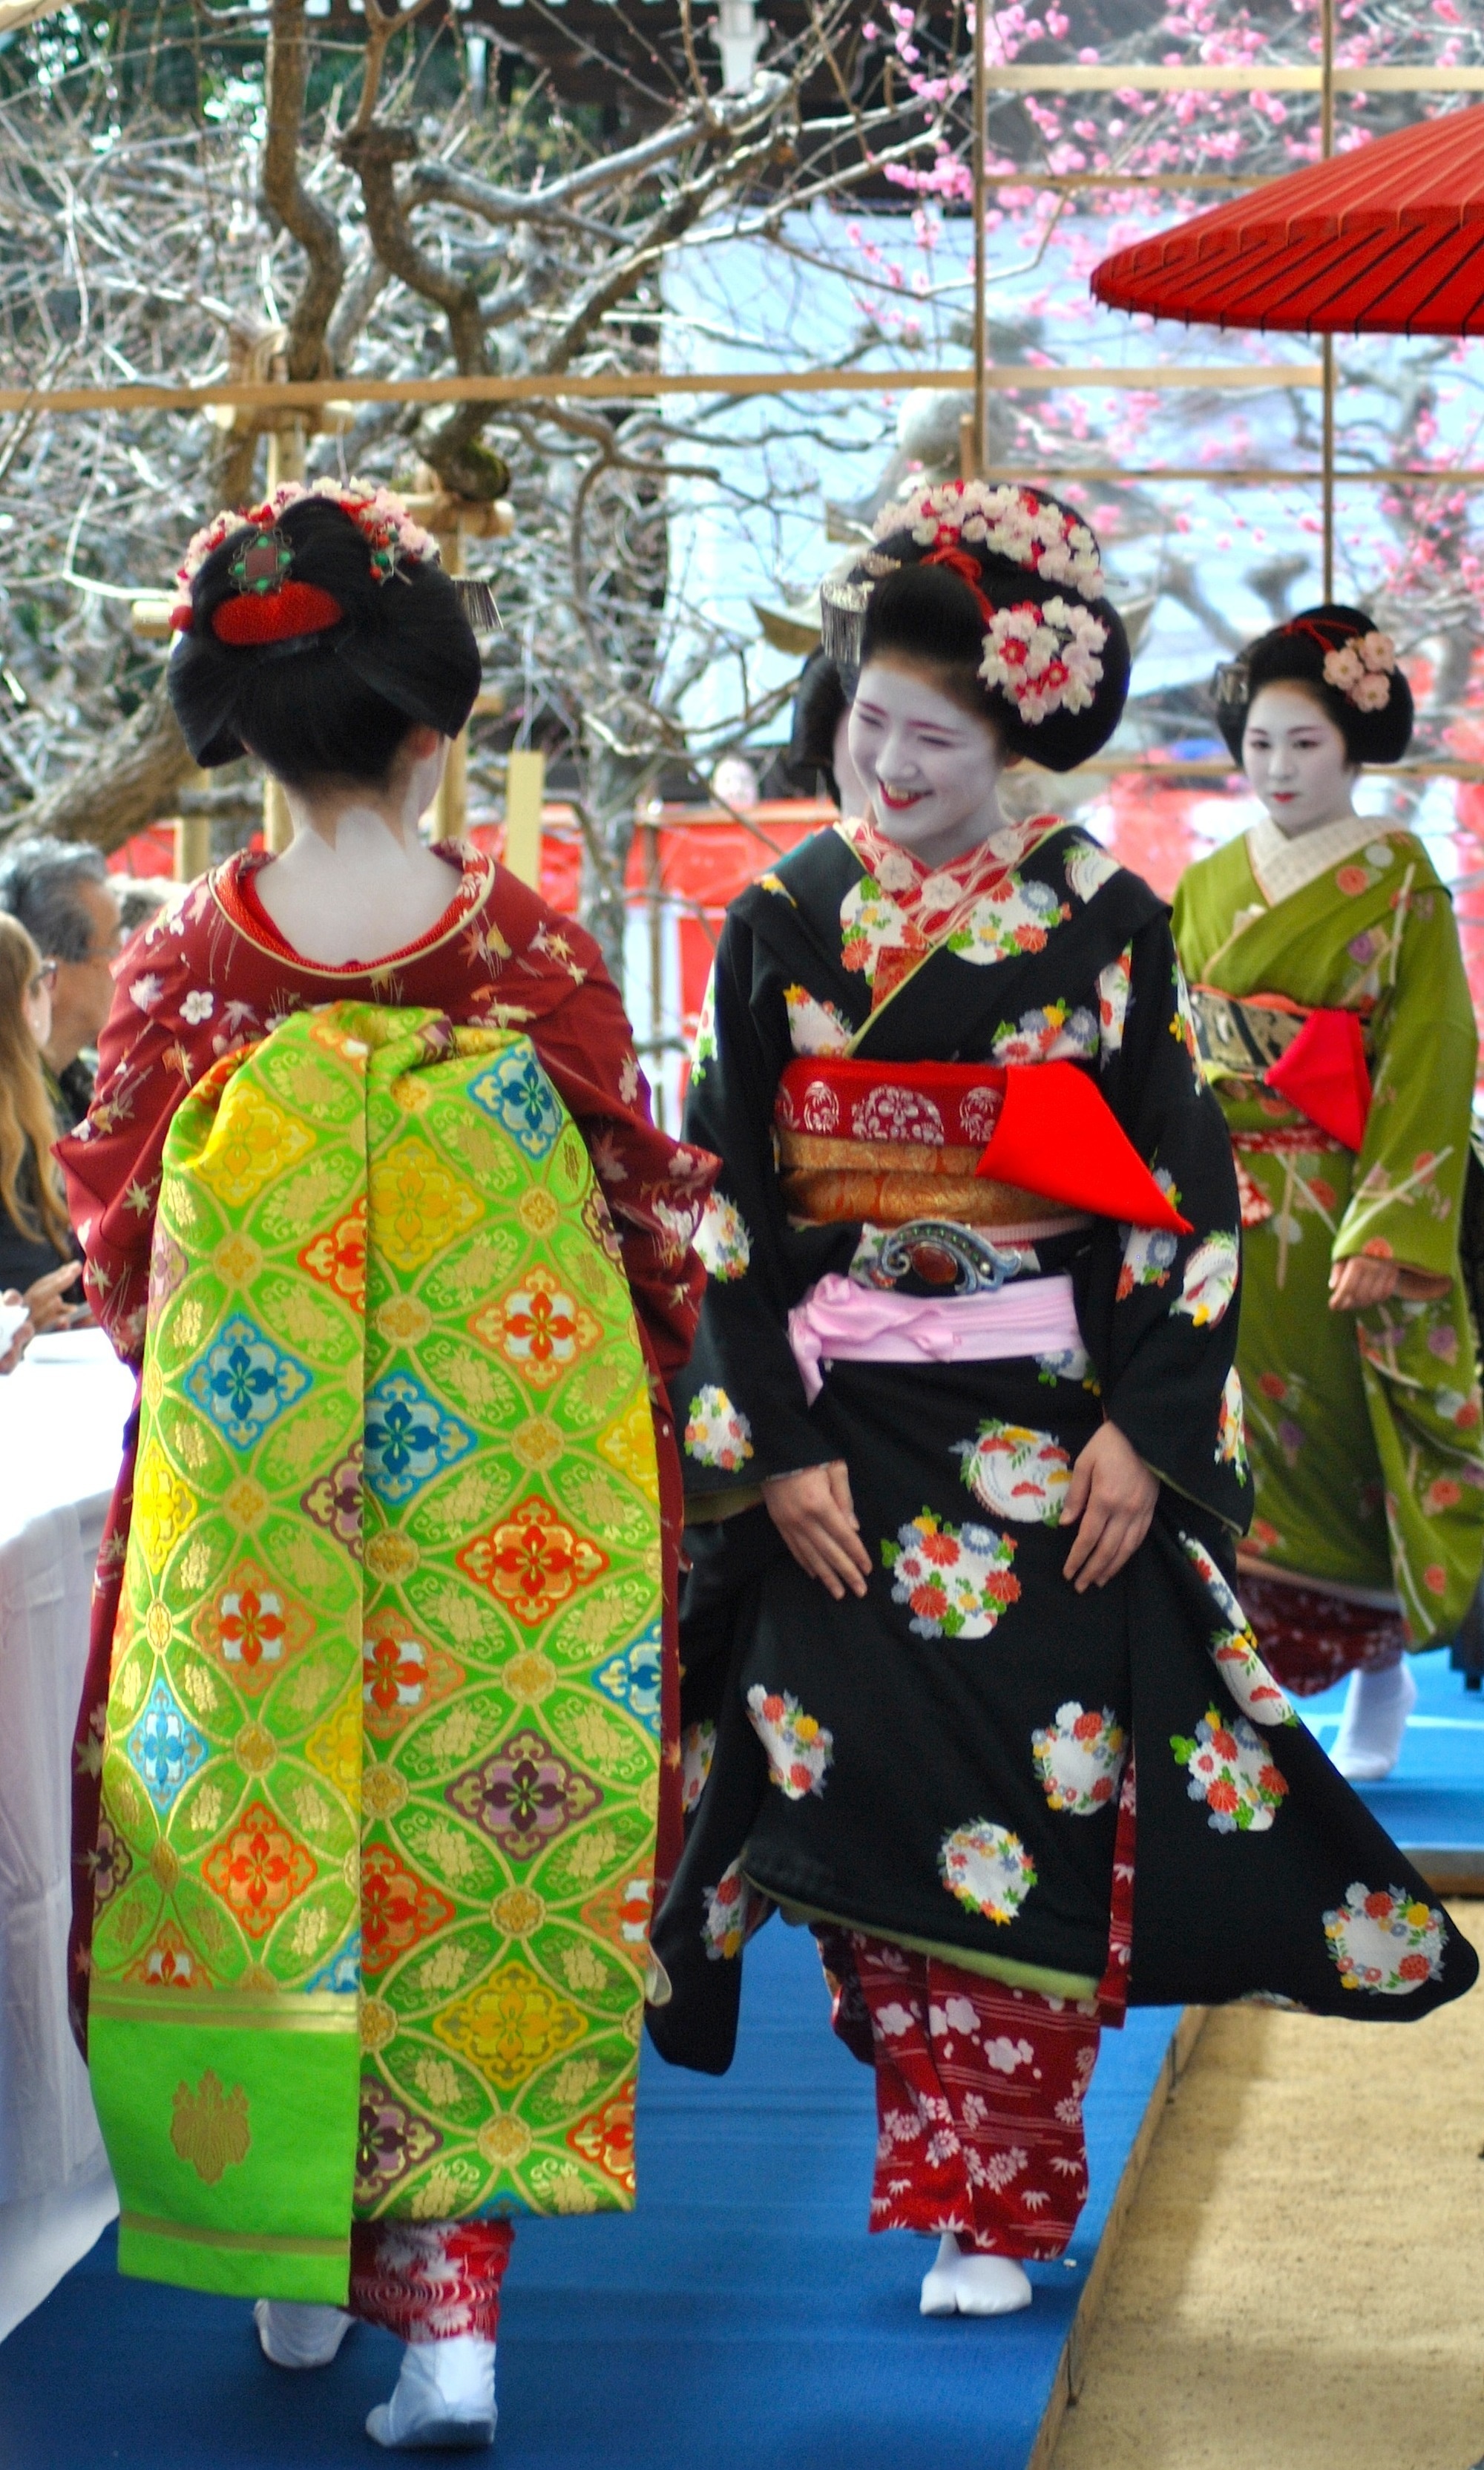 Maiko, or apprentice geisha, greet each one another with soft smiles